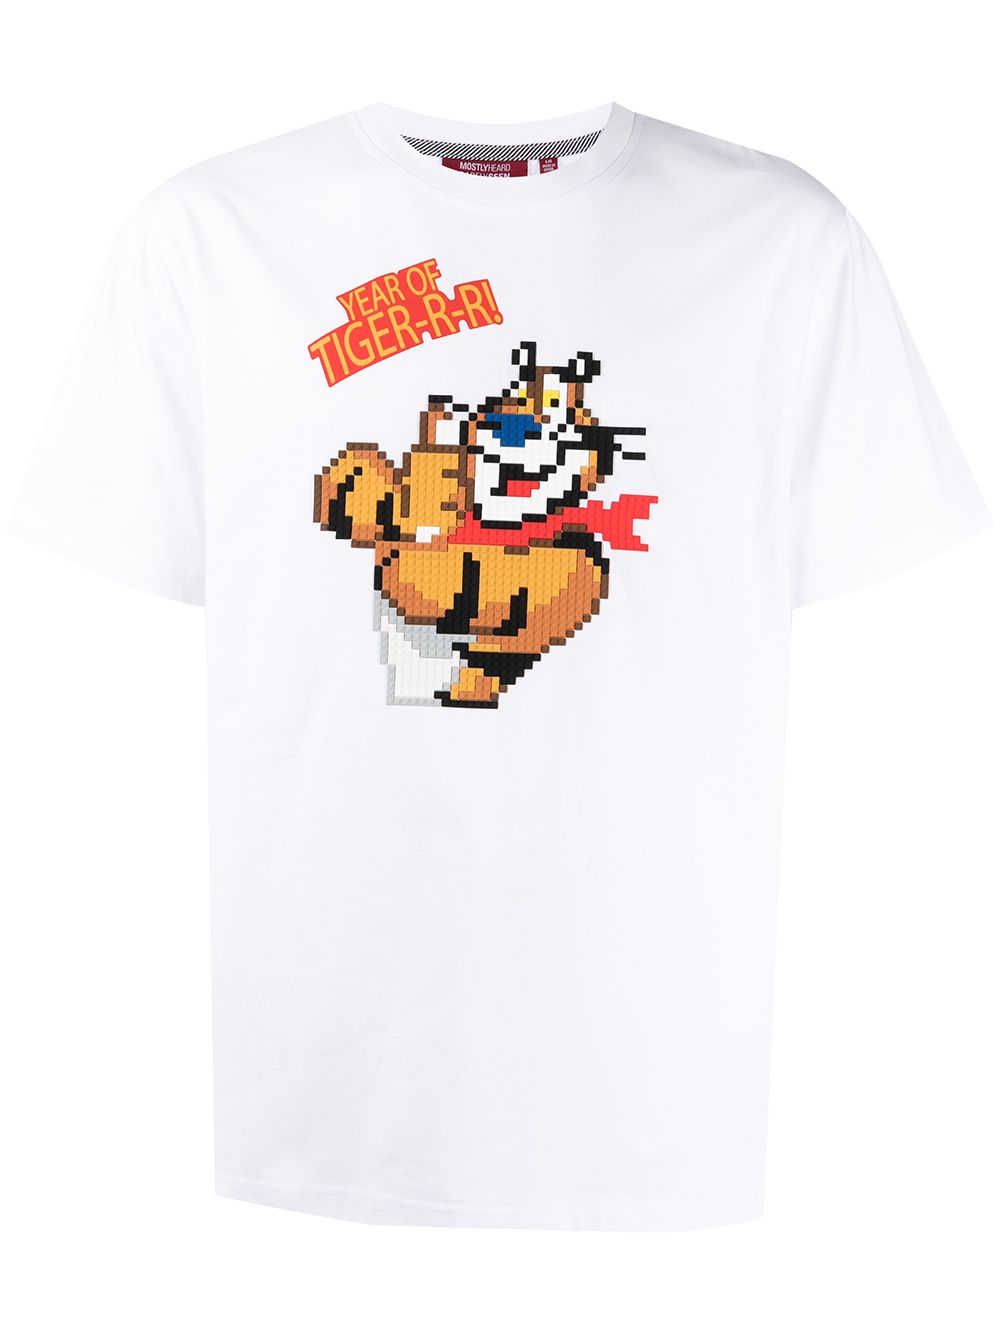 YEAR OF TIGER TEE